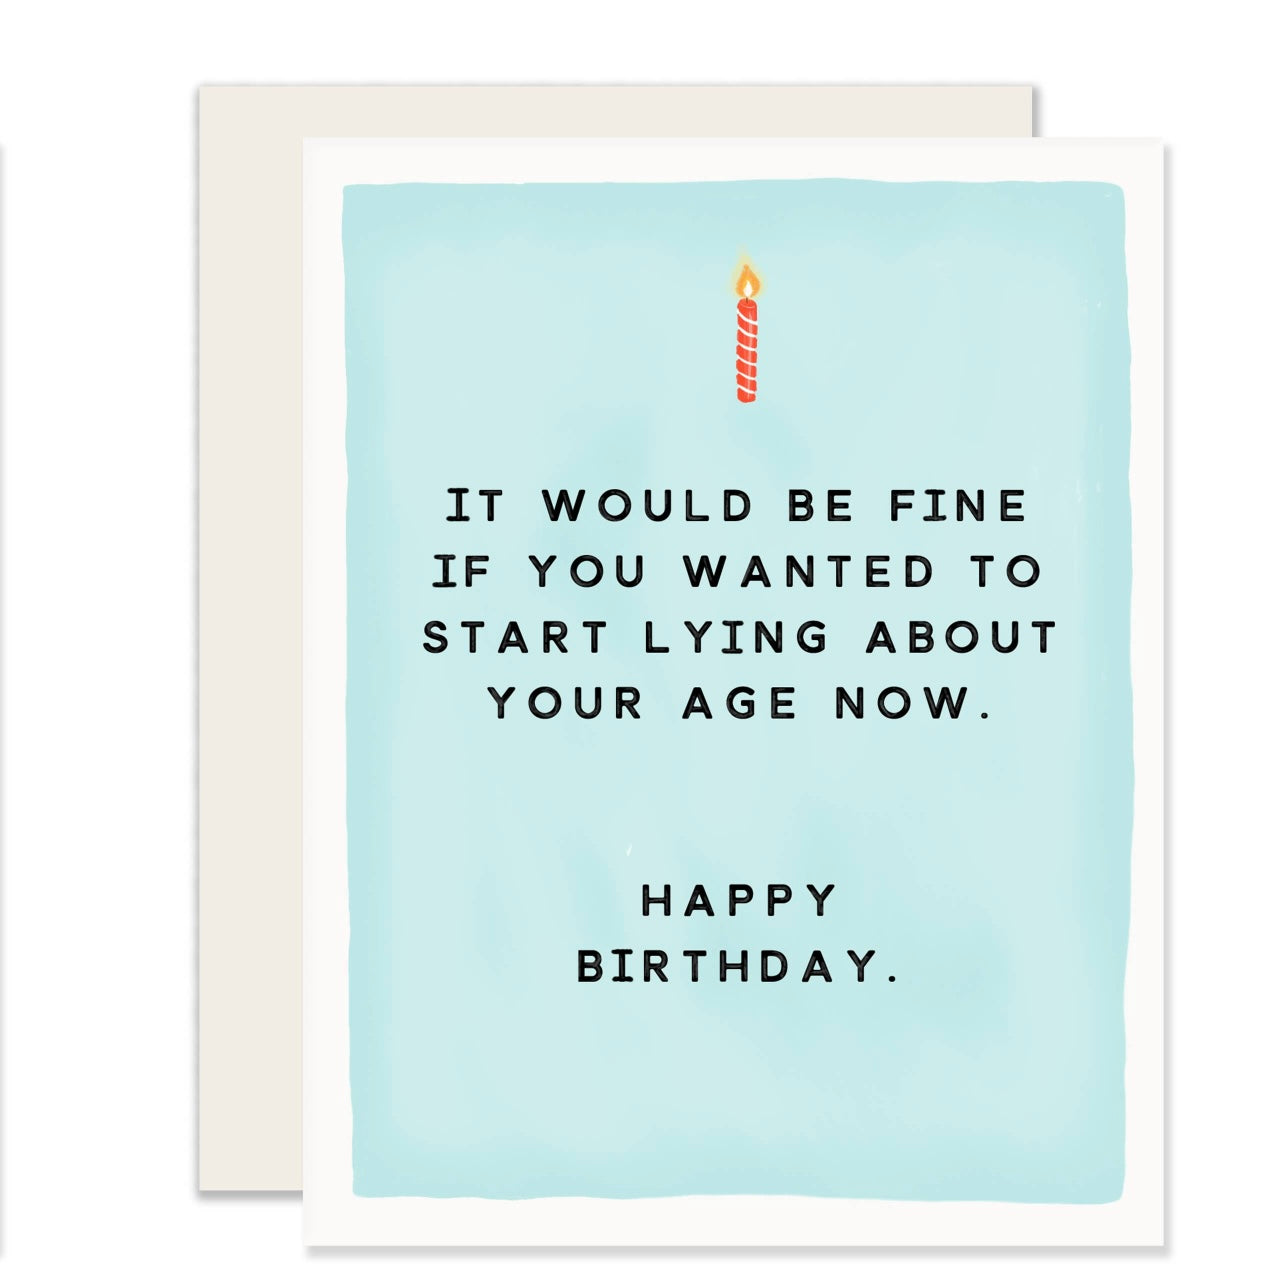 Greeting Card - lying about your age